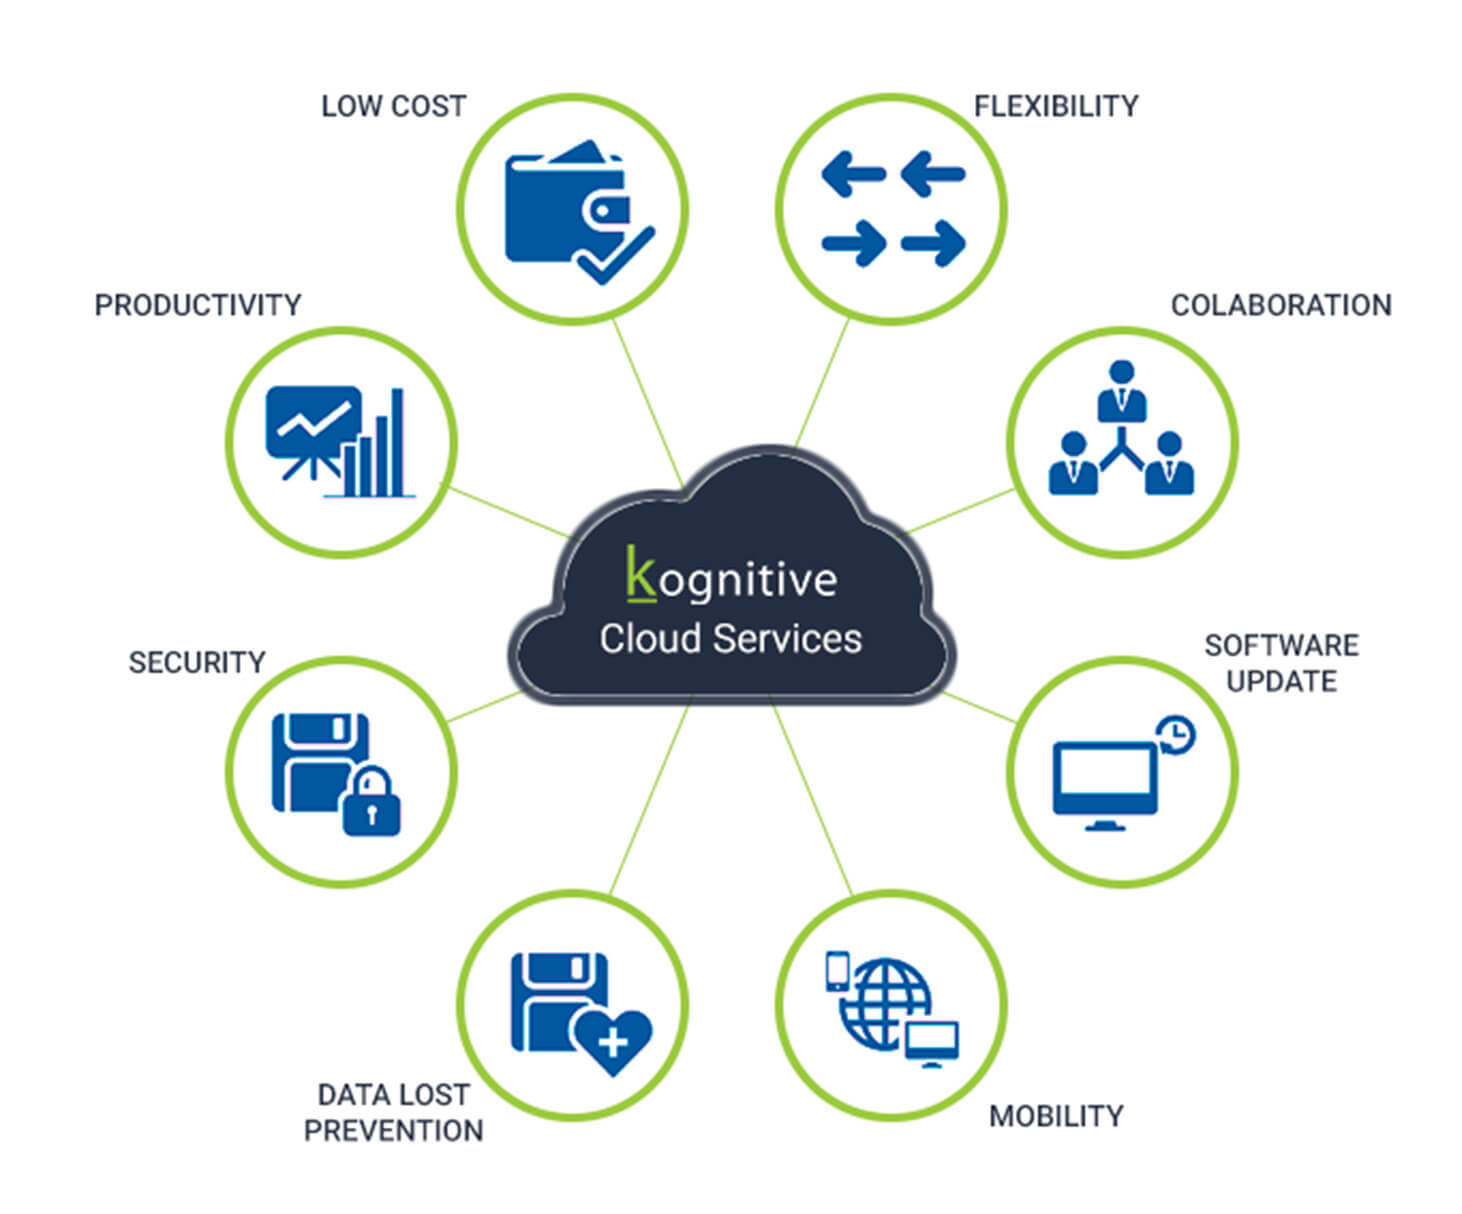 Cloud Strategy Services from Kognitive